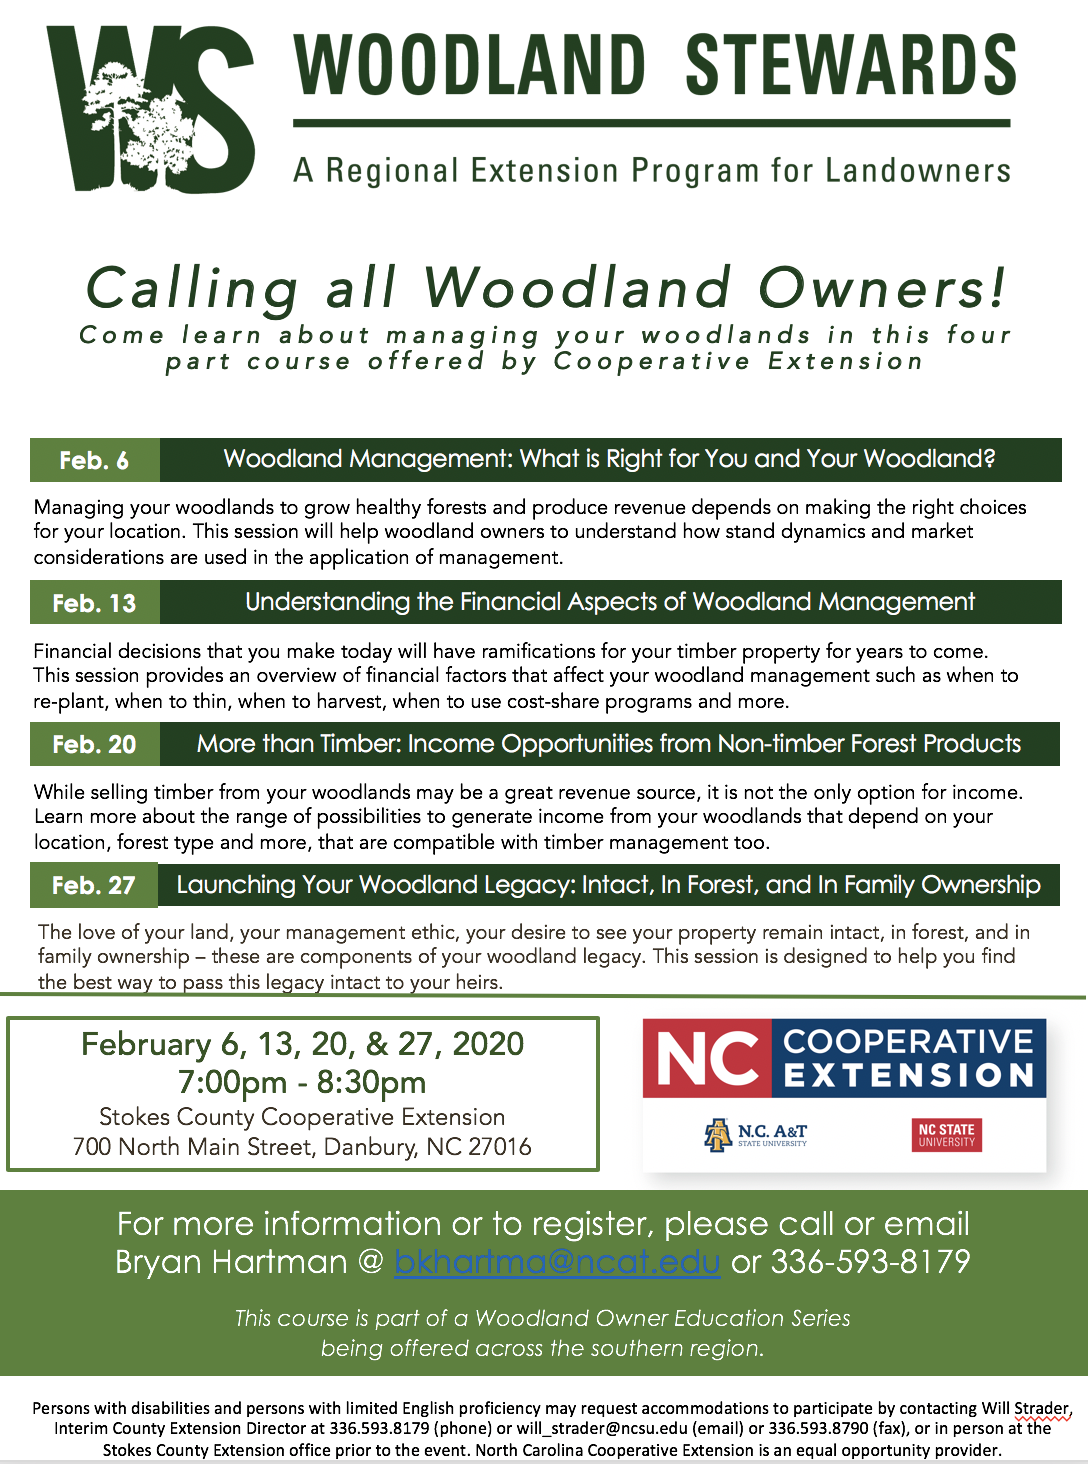 Share your LOVE! — The Woodlands